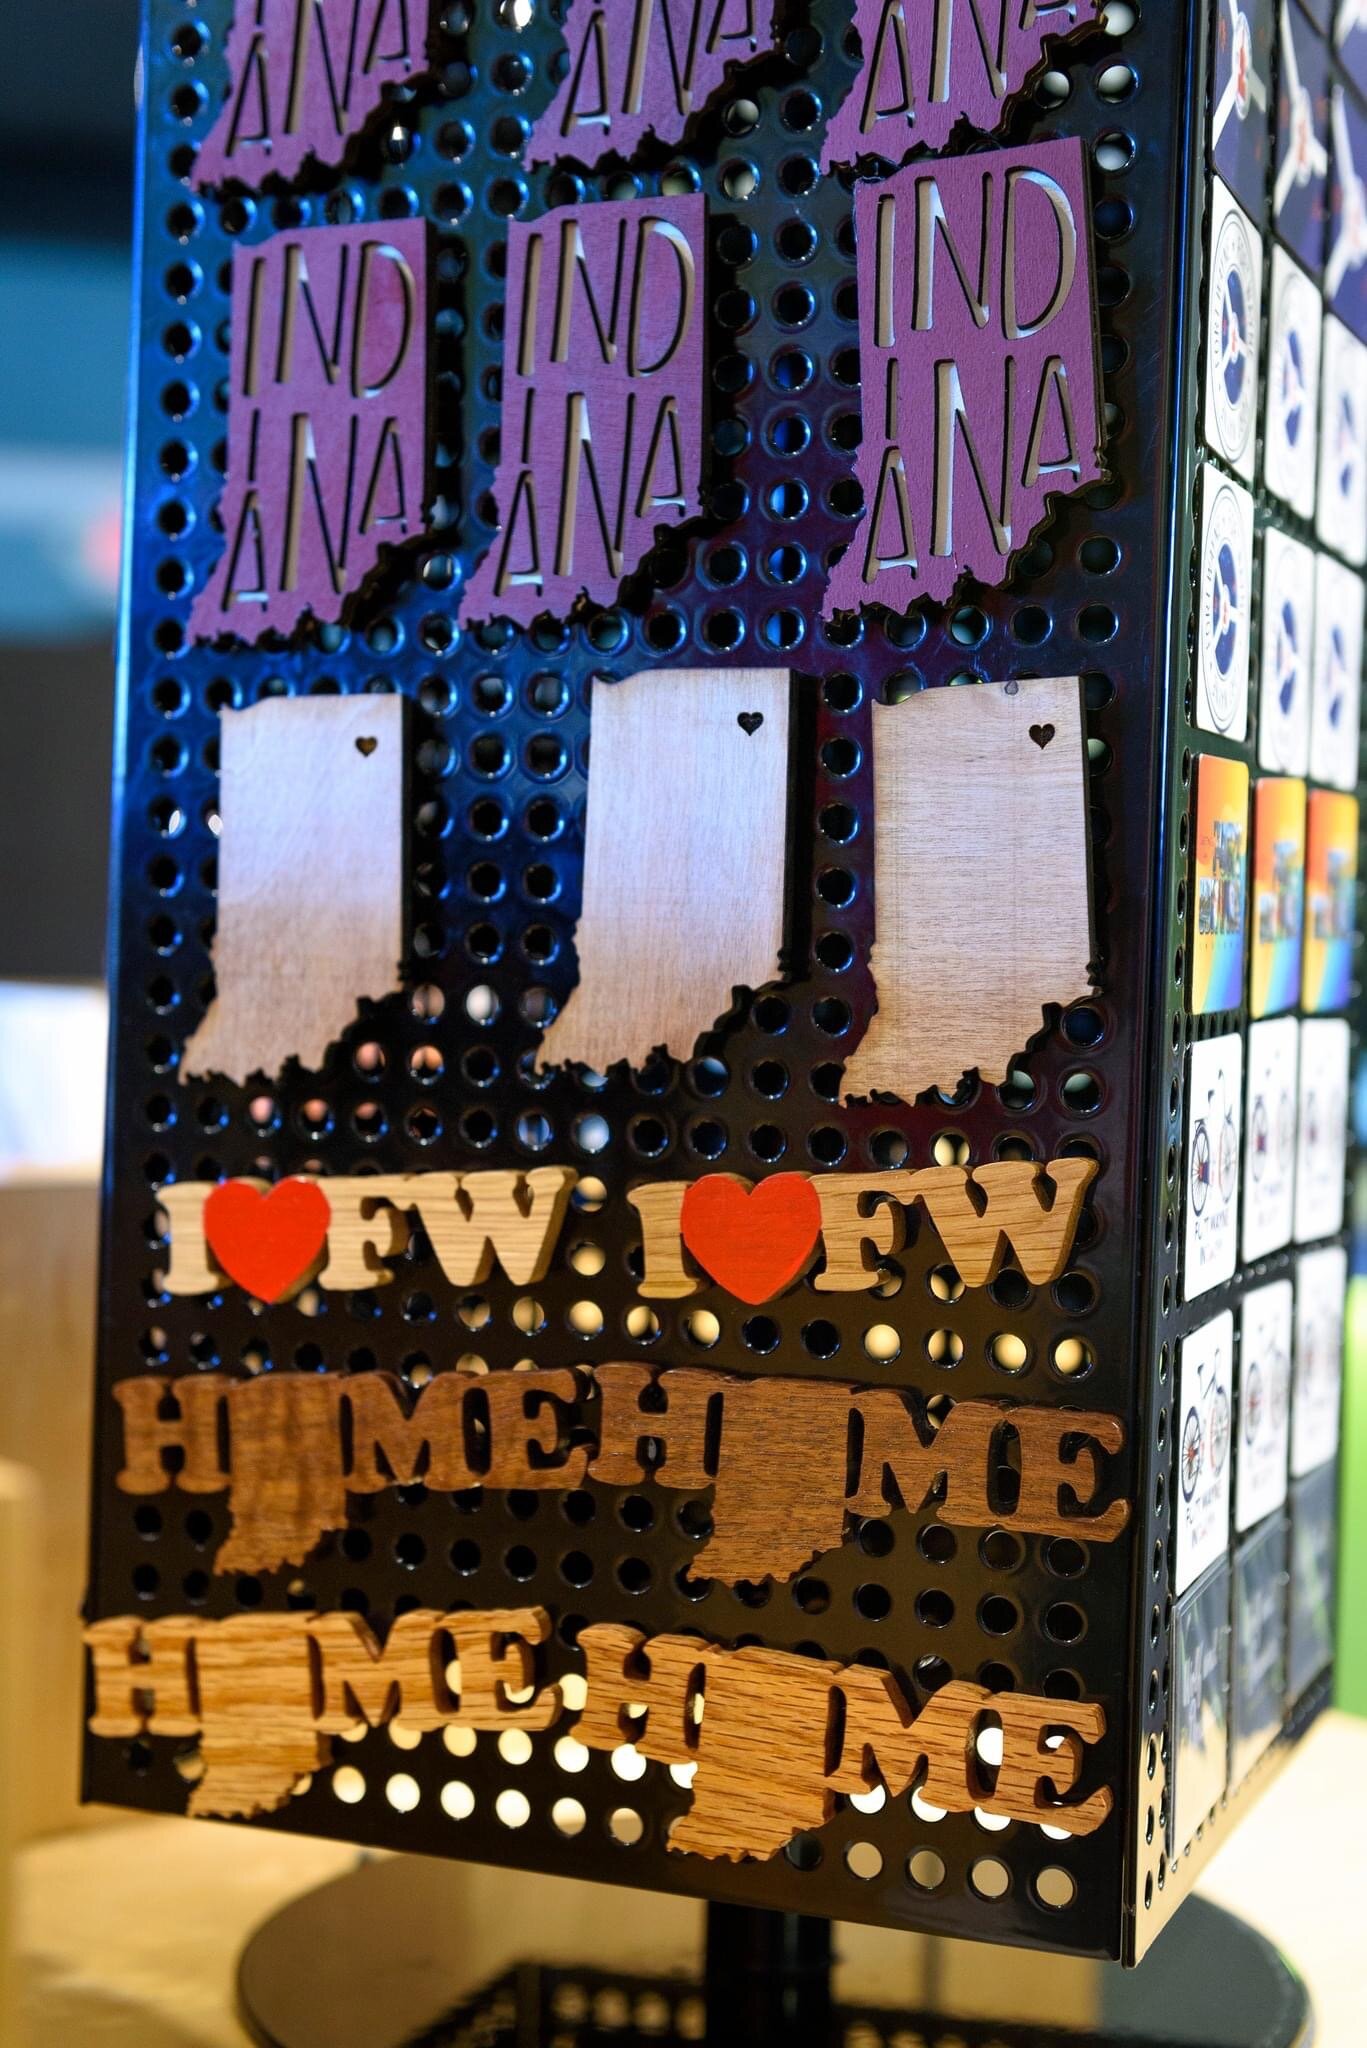 Visit Fort Wayne offers locally made magnets and ornaments.